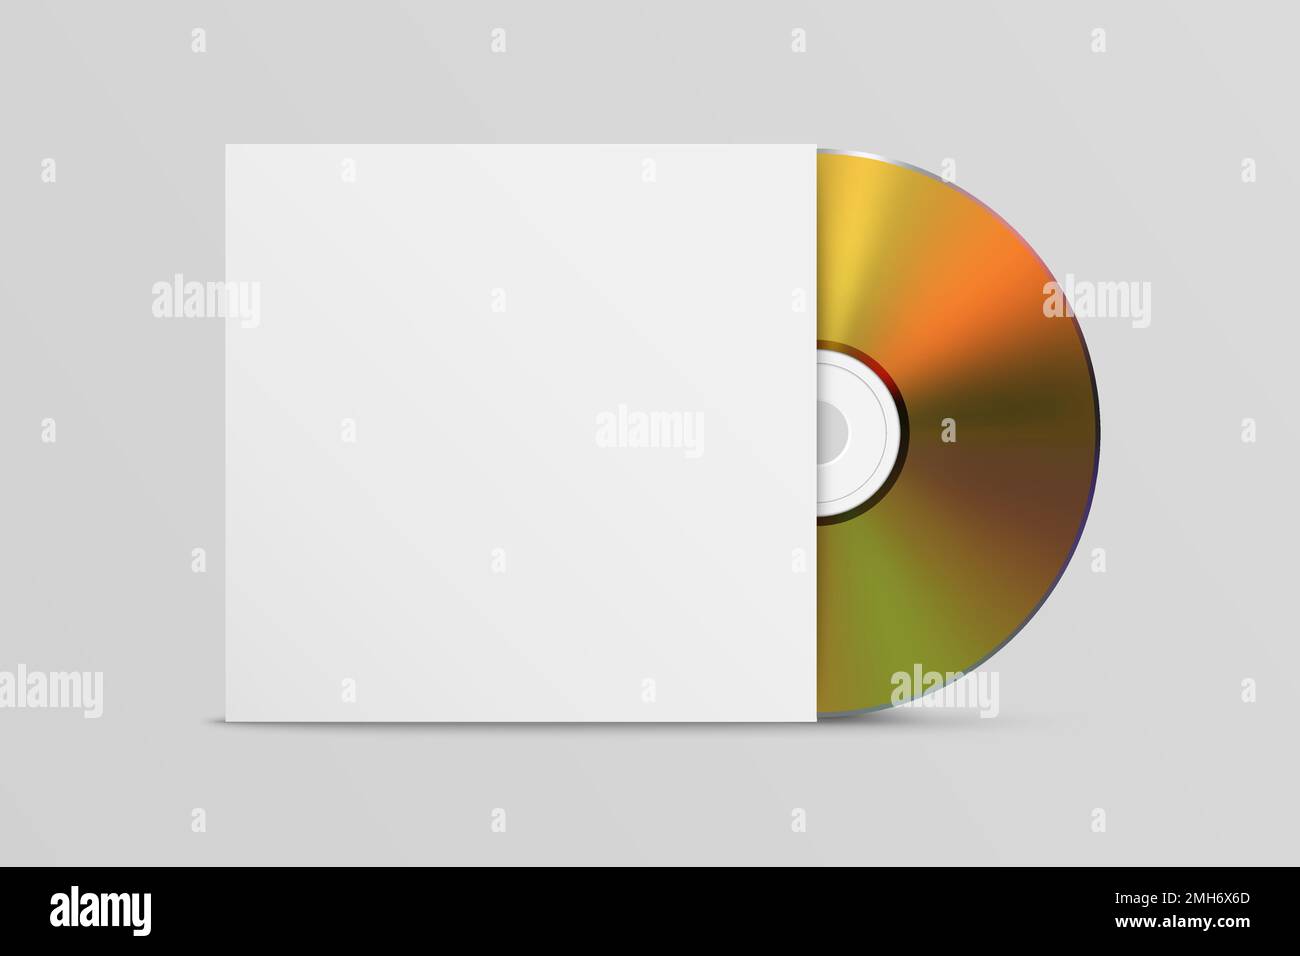 Vector Realistic Yellow CD, DVD with Paper or Plastic Square Cover, Envelope, Case Icon Closeup Isolated on White Background. CD Box, Packaging Design Stock Vector